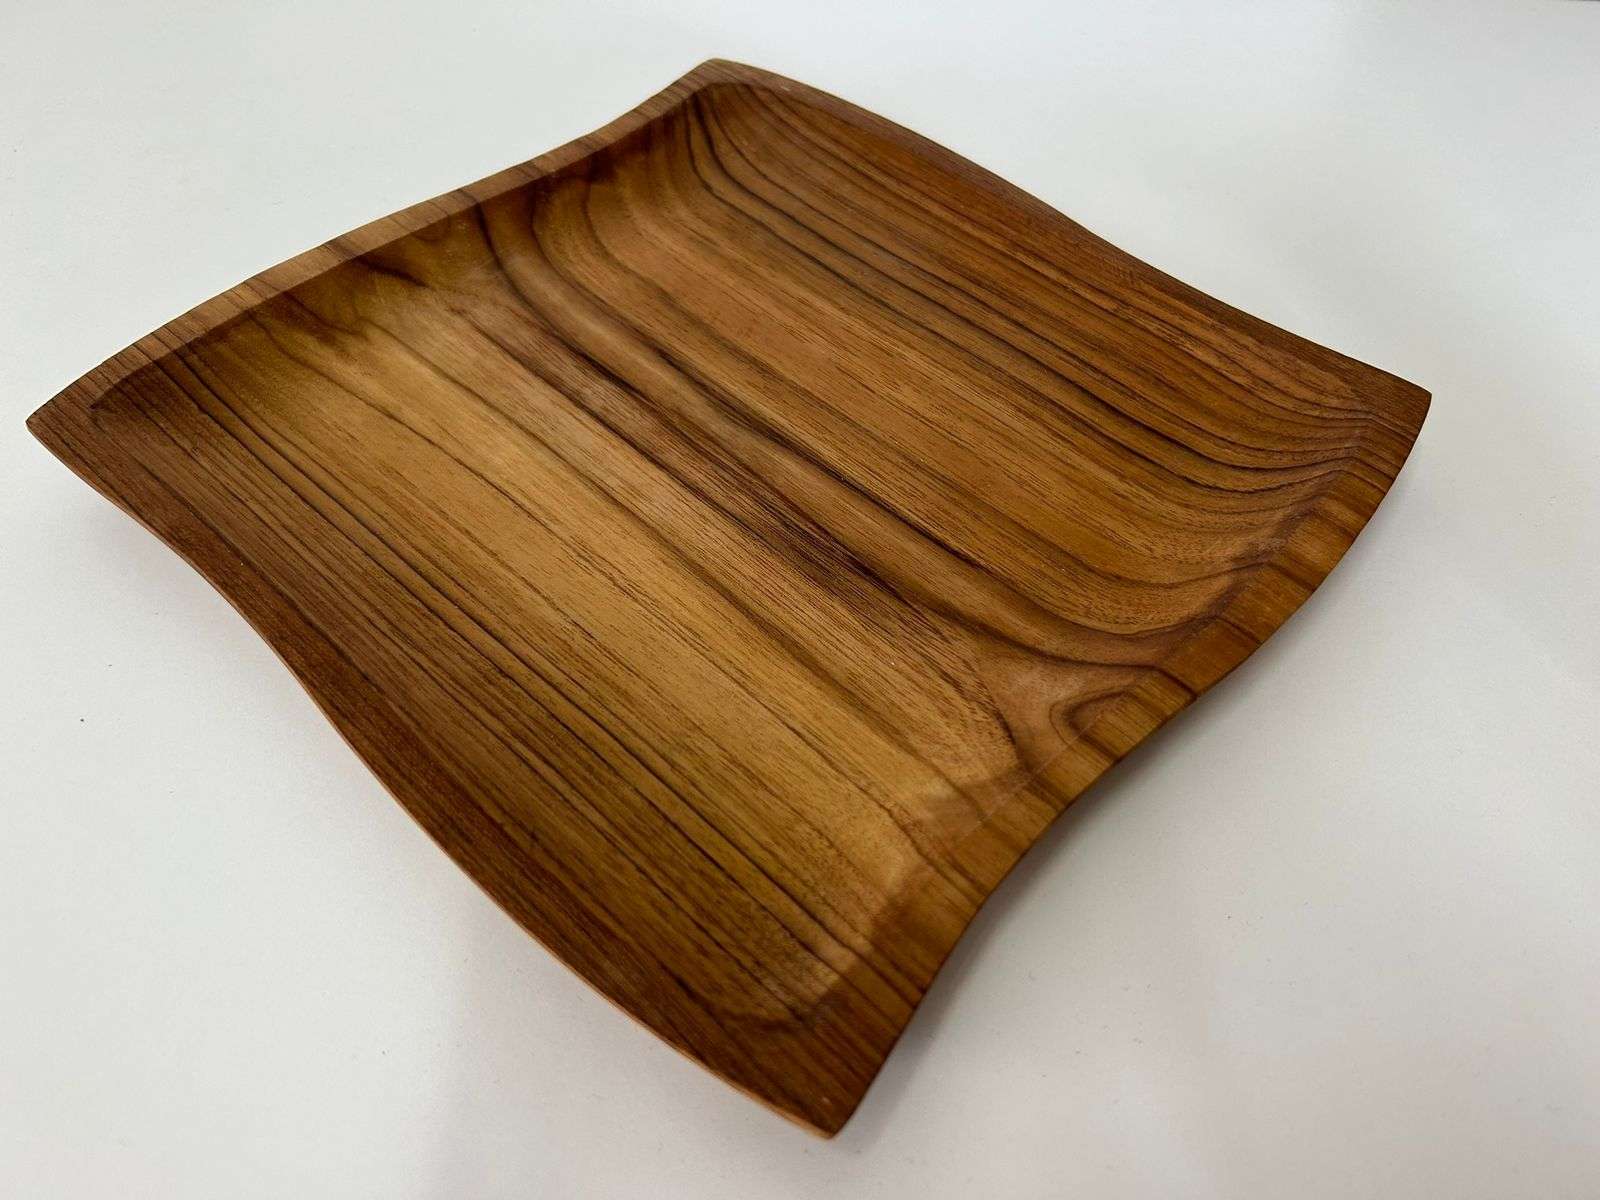 The Square Wooden plate